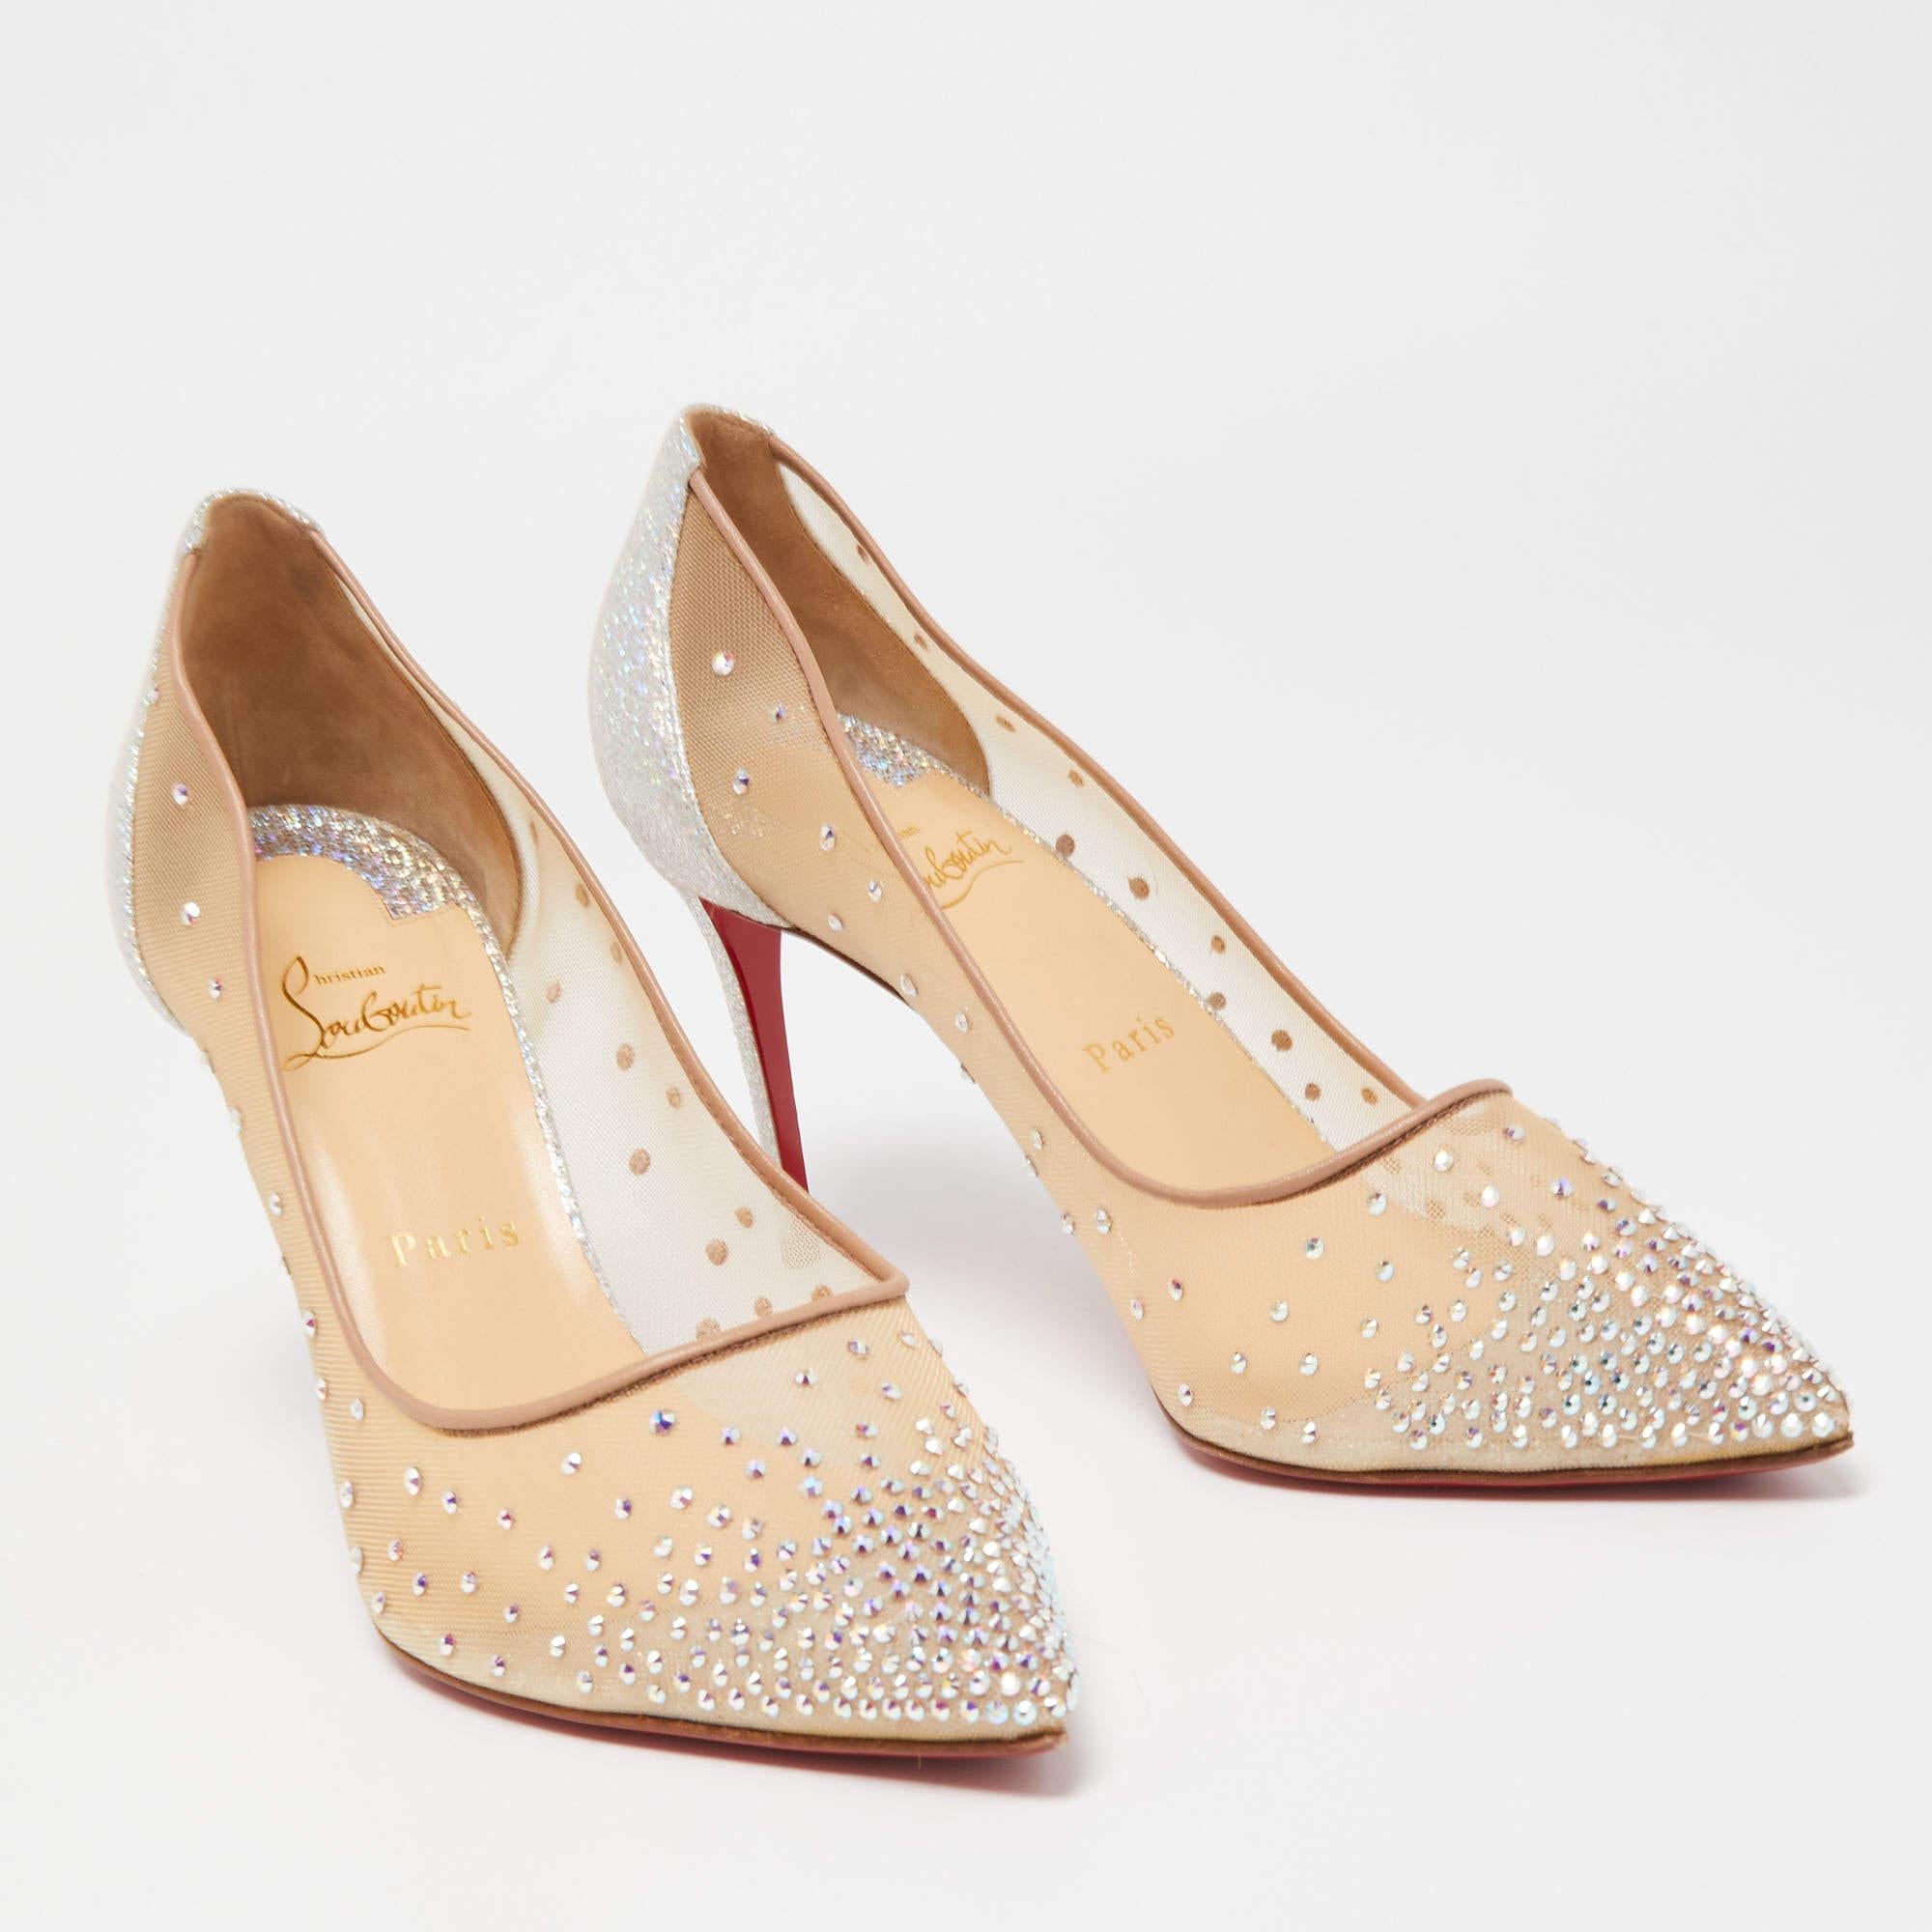 Women's Christian Louboutin Silver/Beige Mesh and Texture Leather Follies Pumps 